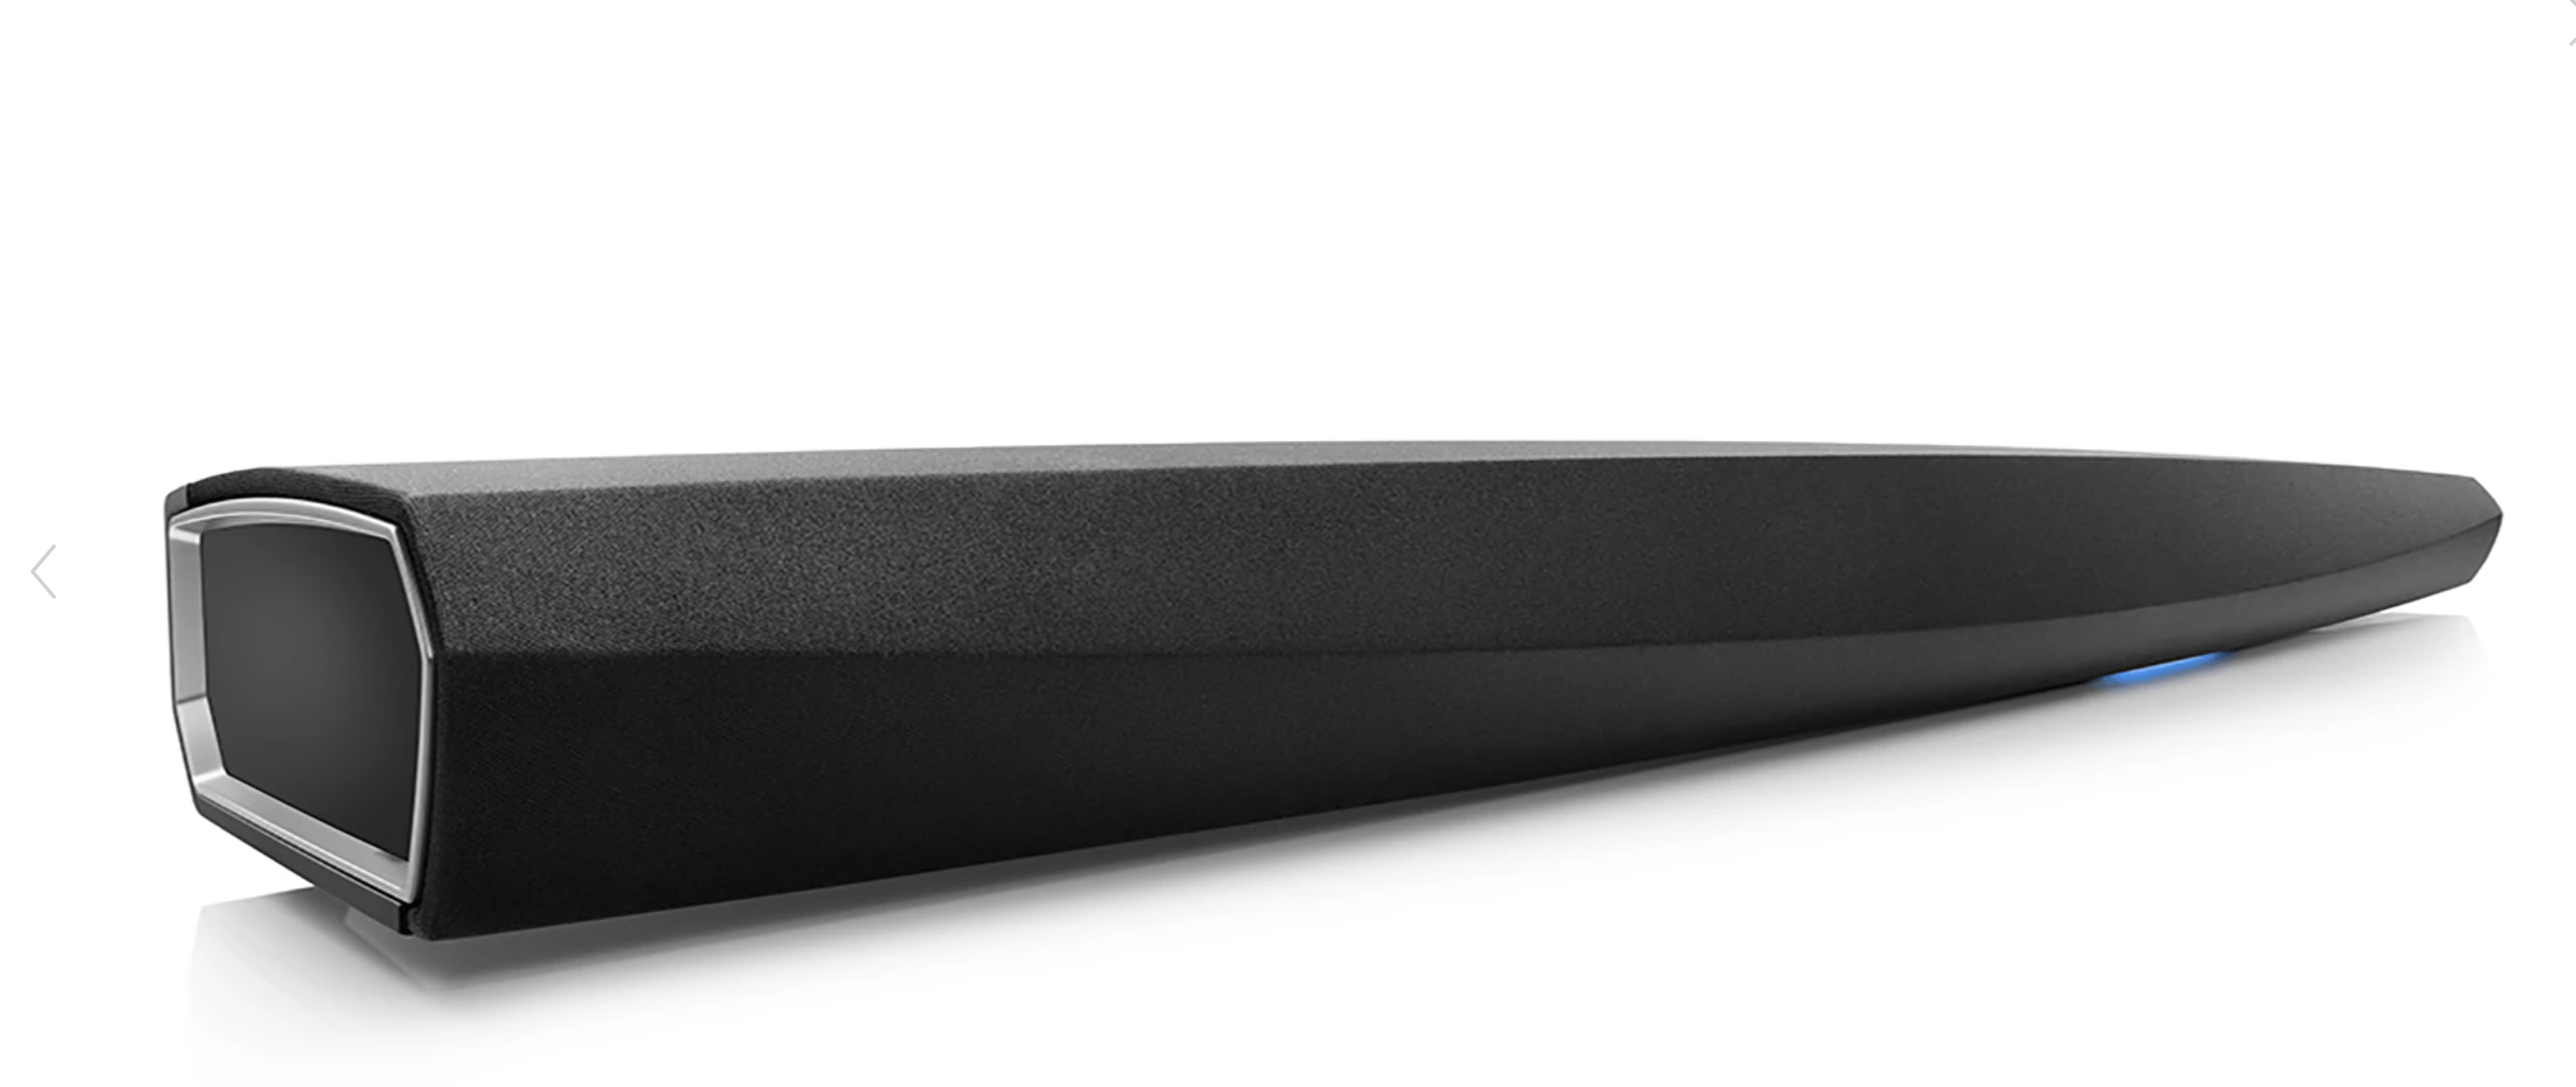 Denon is Rolling Out Roku TV Ready Update to Select Soundbars